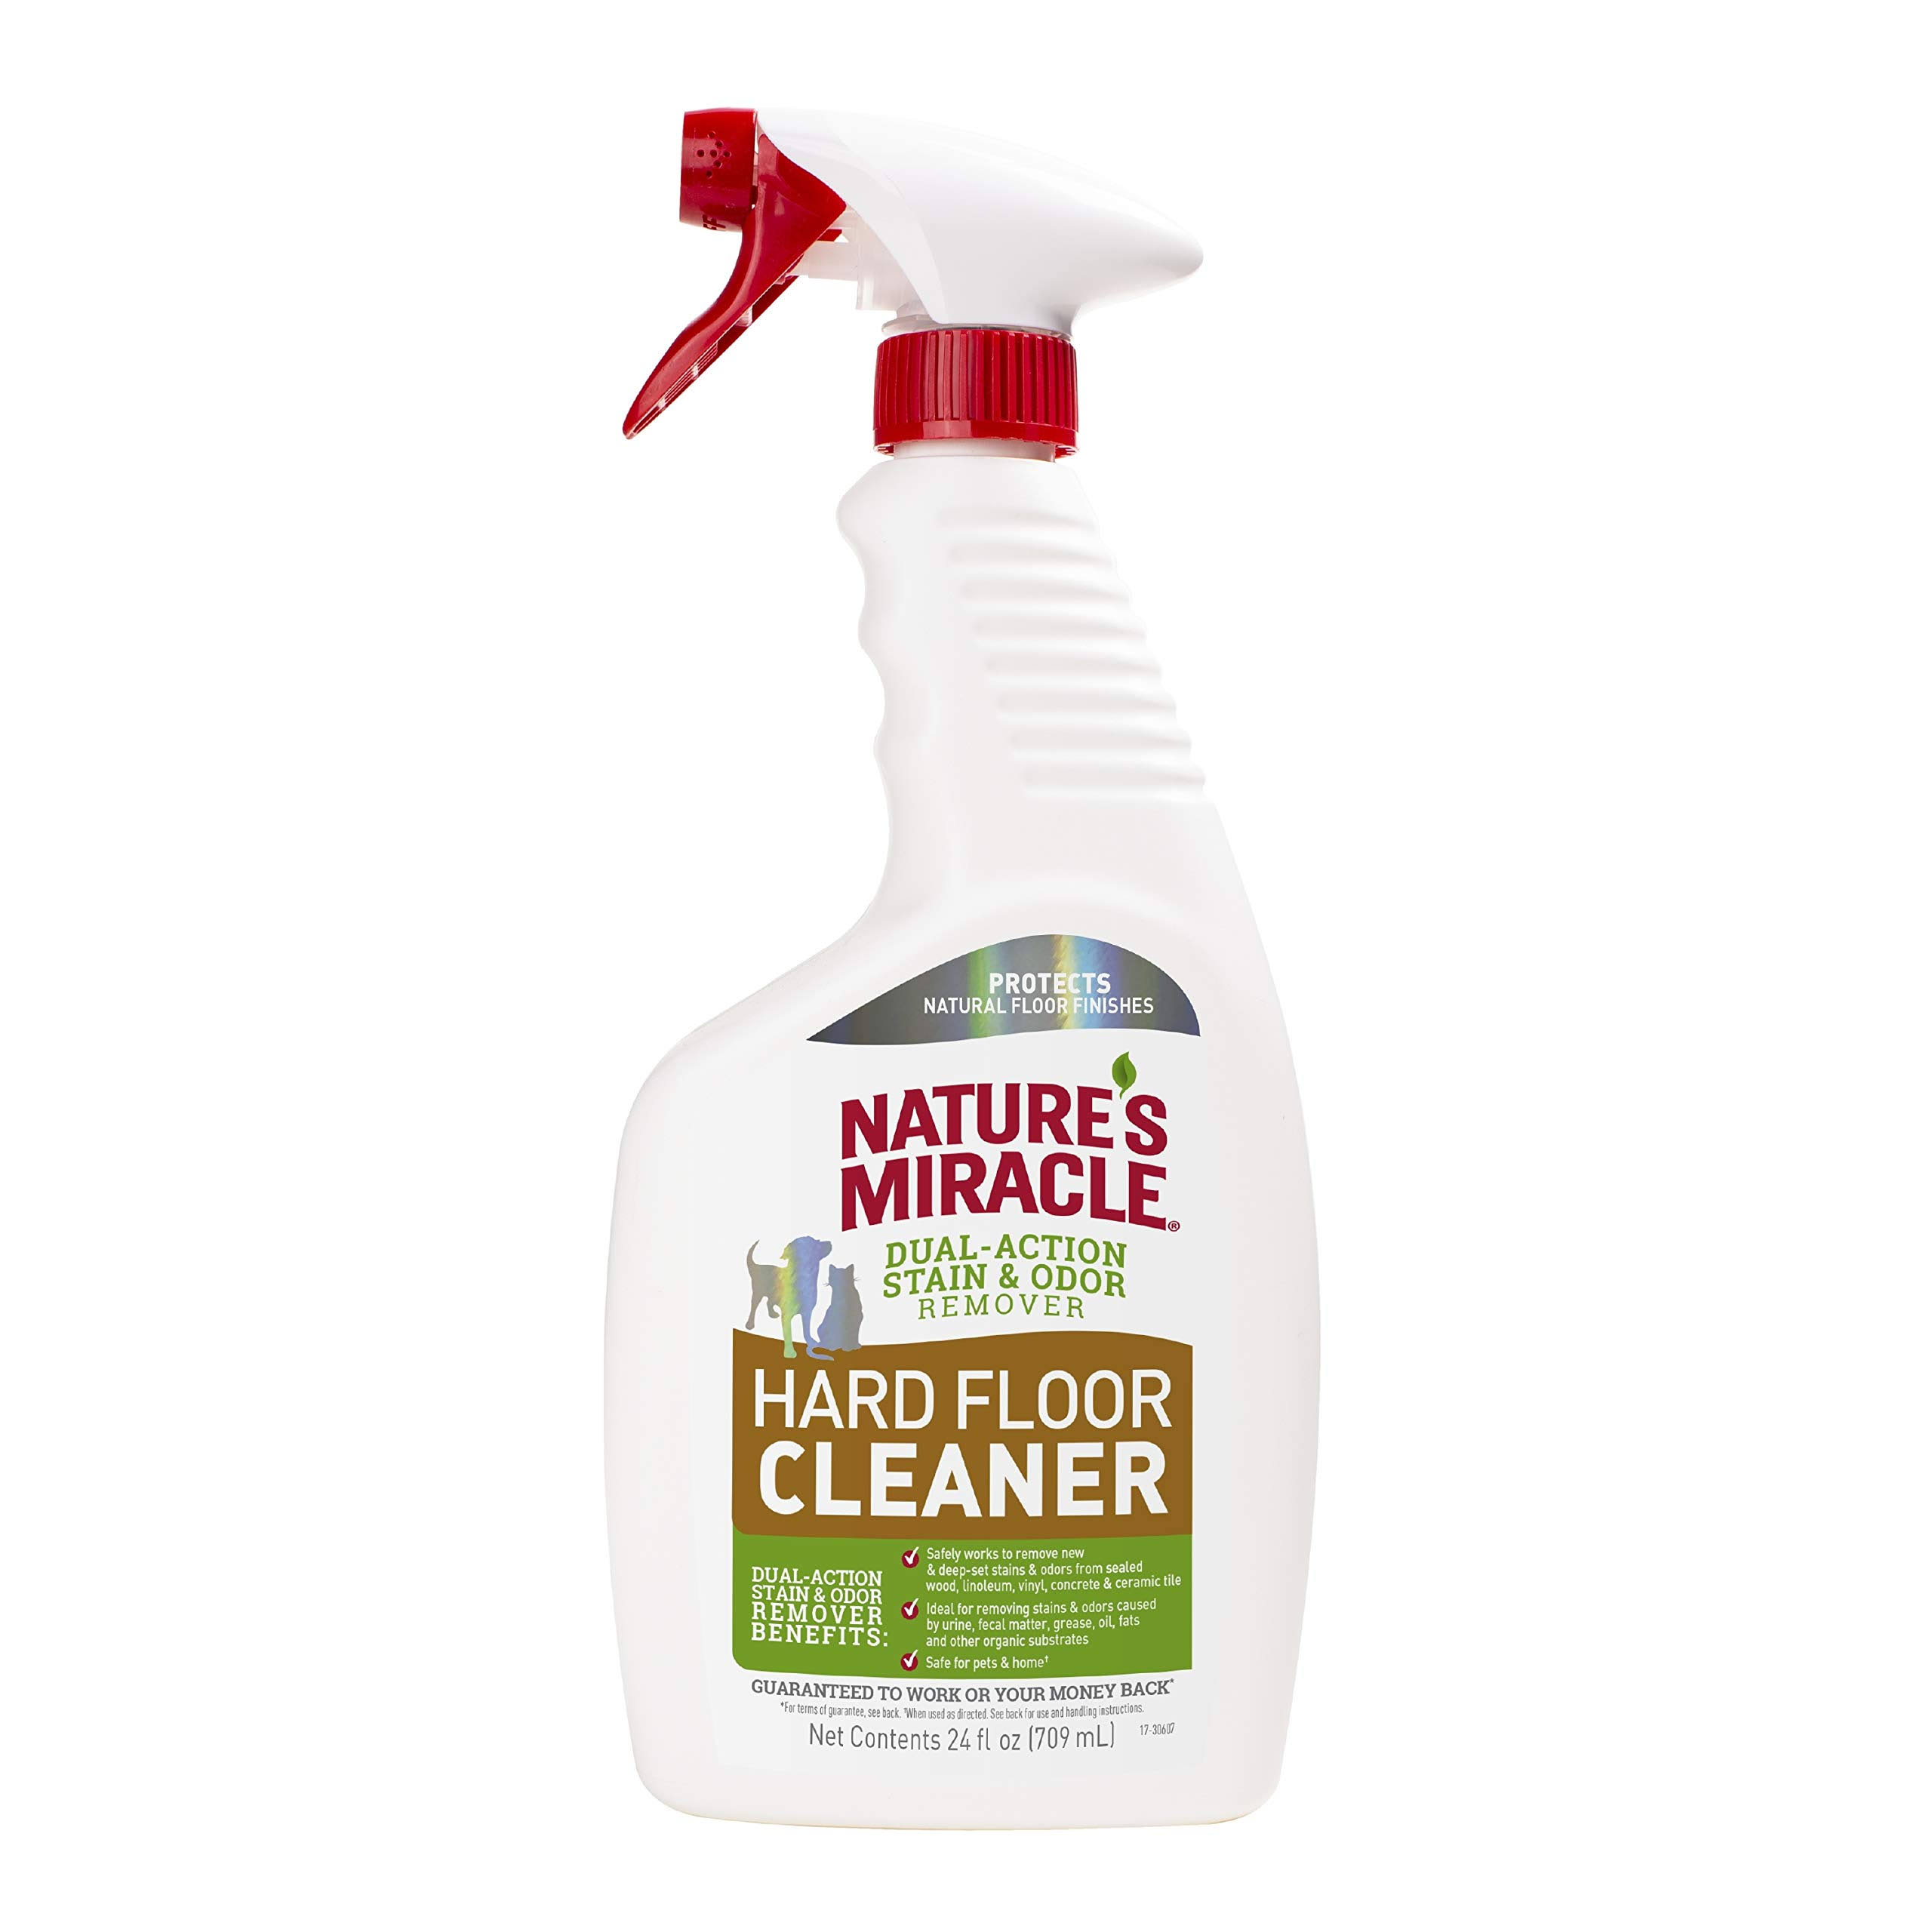 Nature's Miracle Dual Action Stain & Odor Remover Hard Floor Cleaner 24oz 709ml